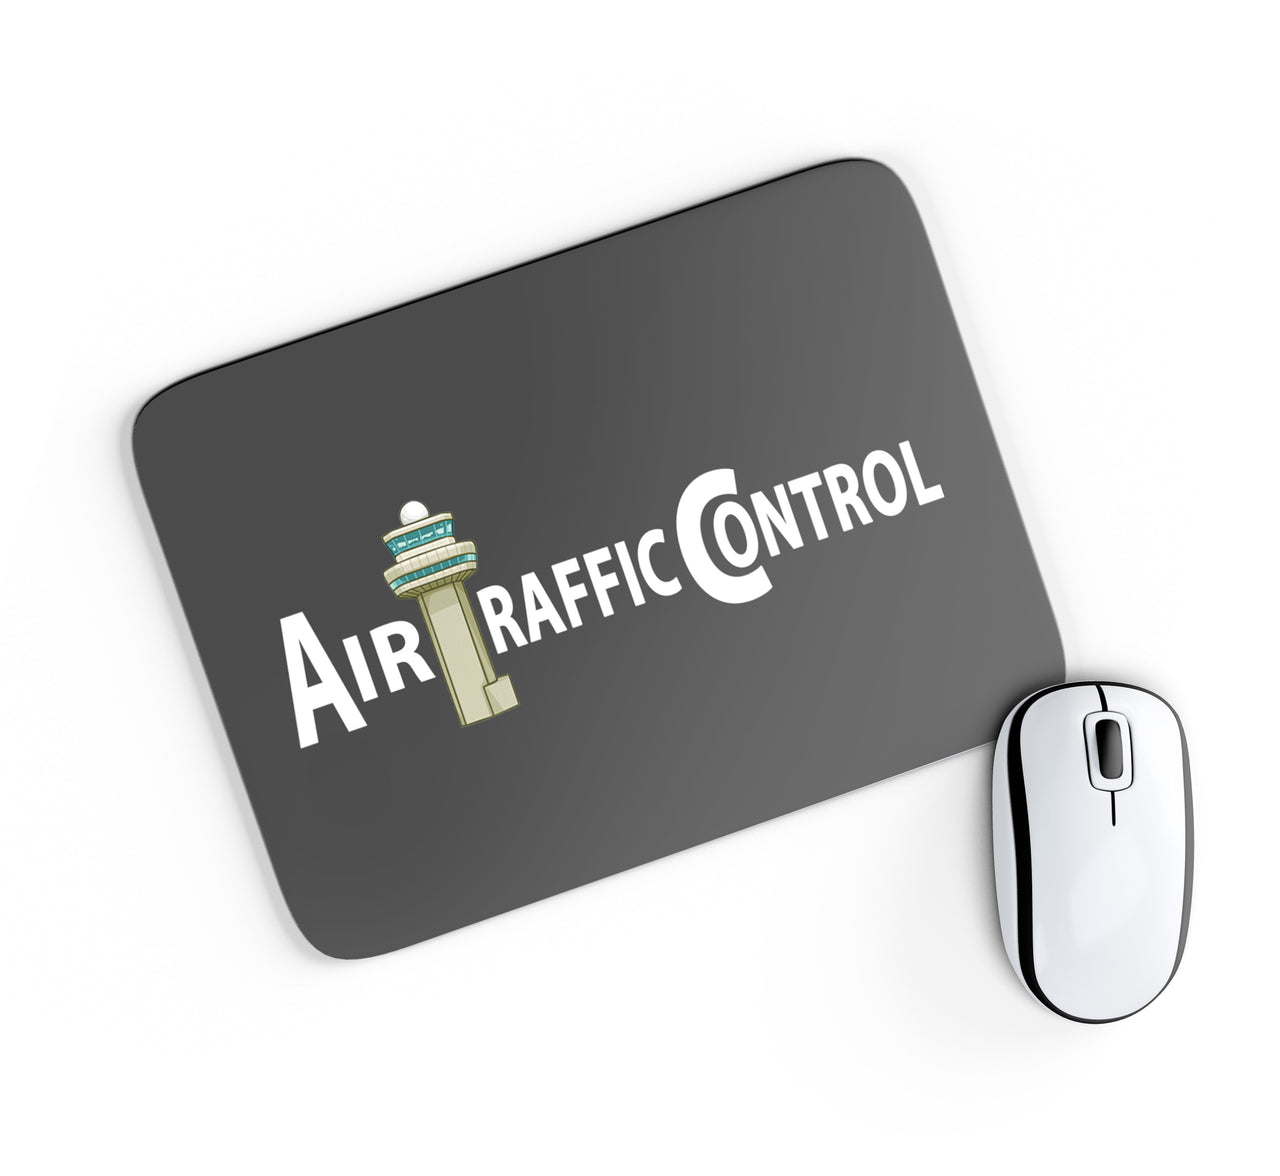 Air Traffic Control Designed Mouse Pads